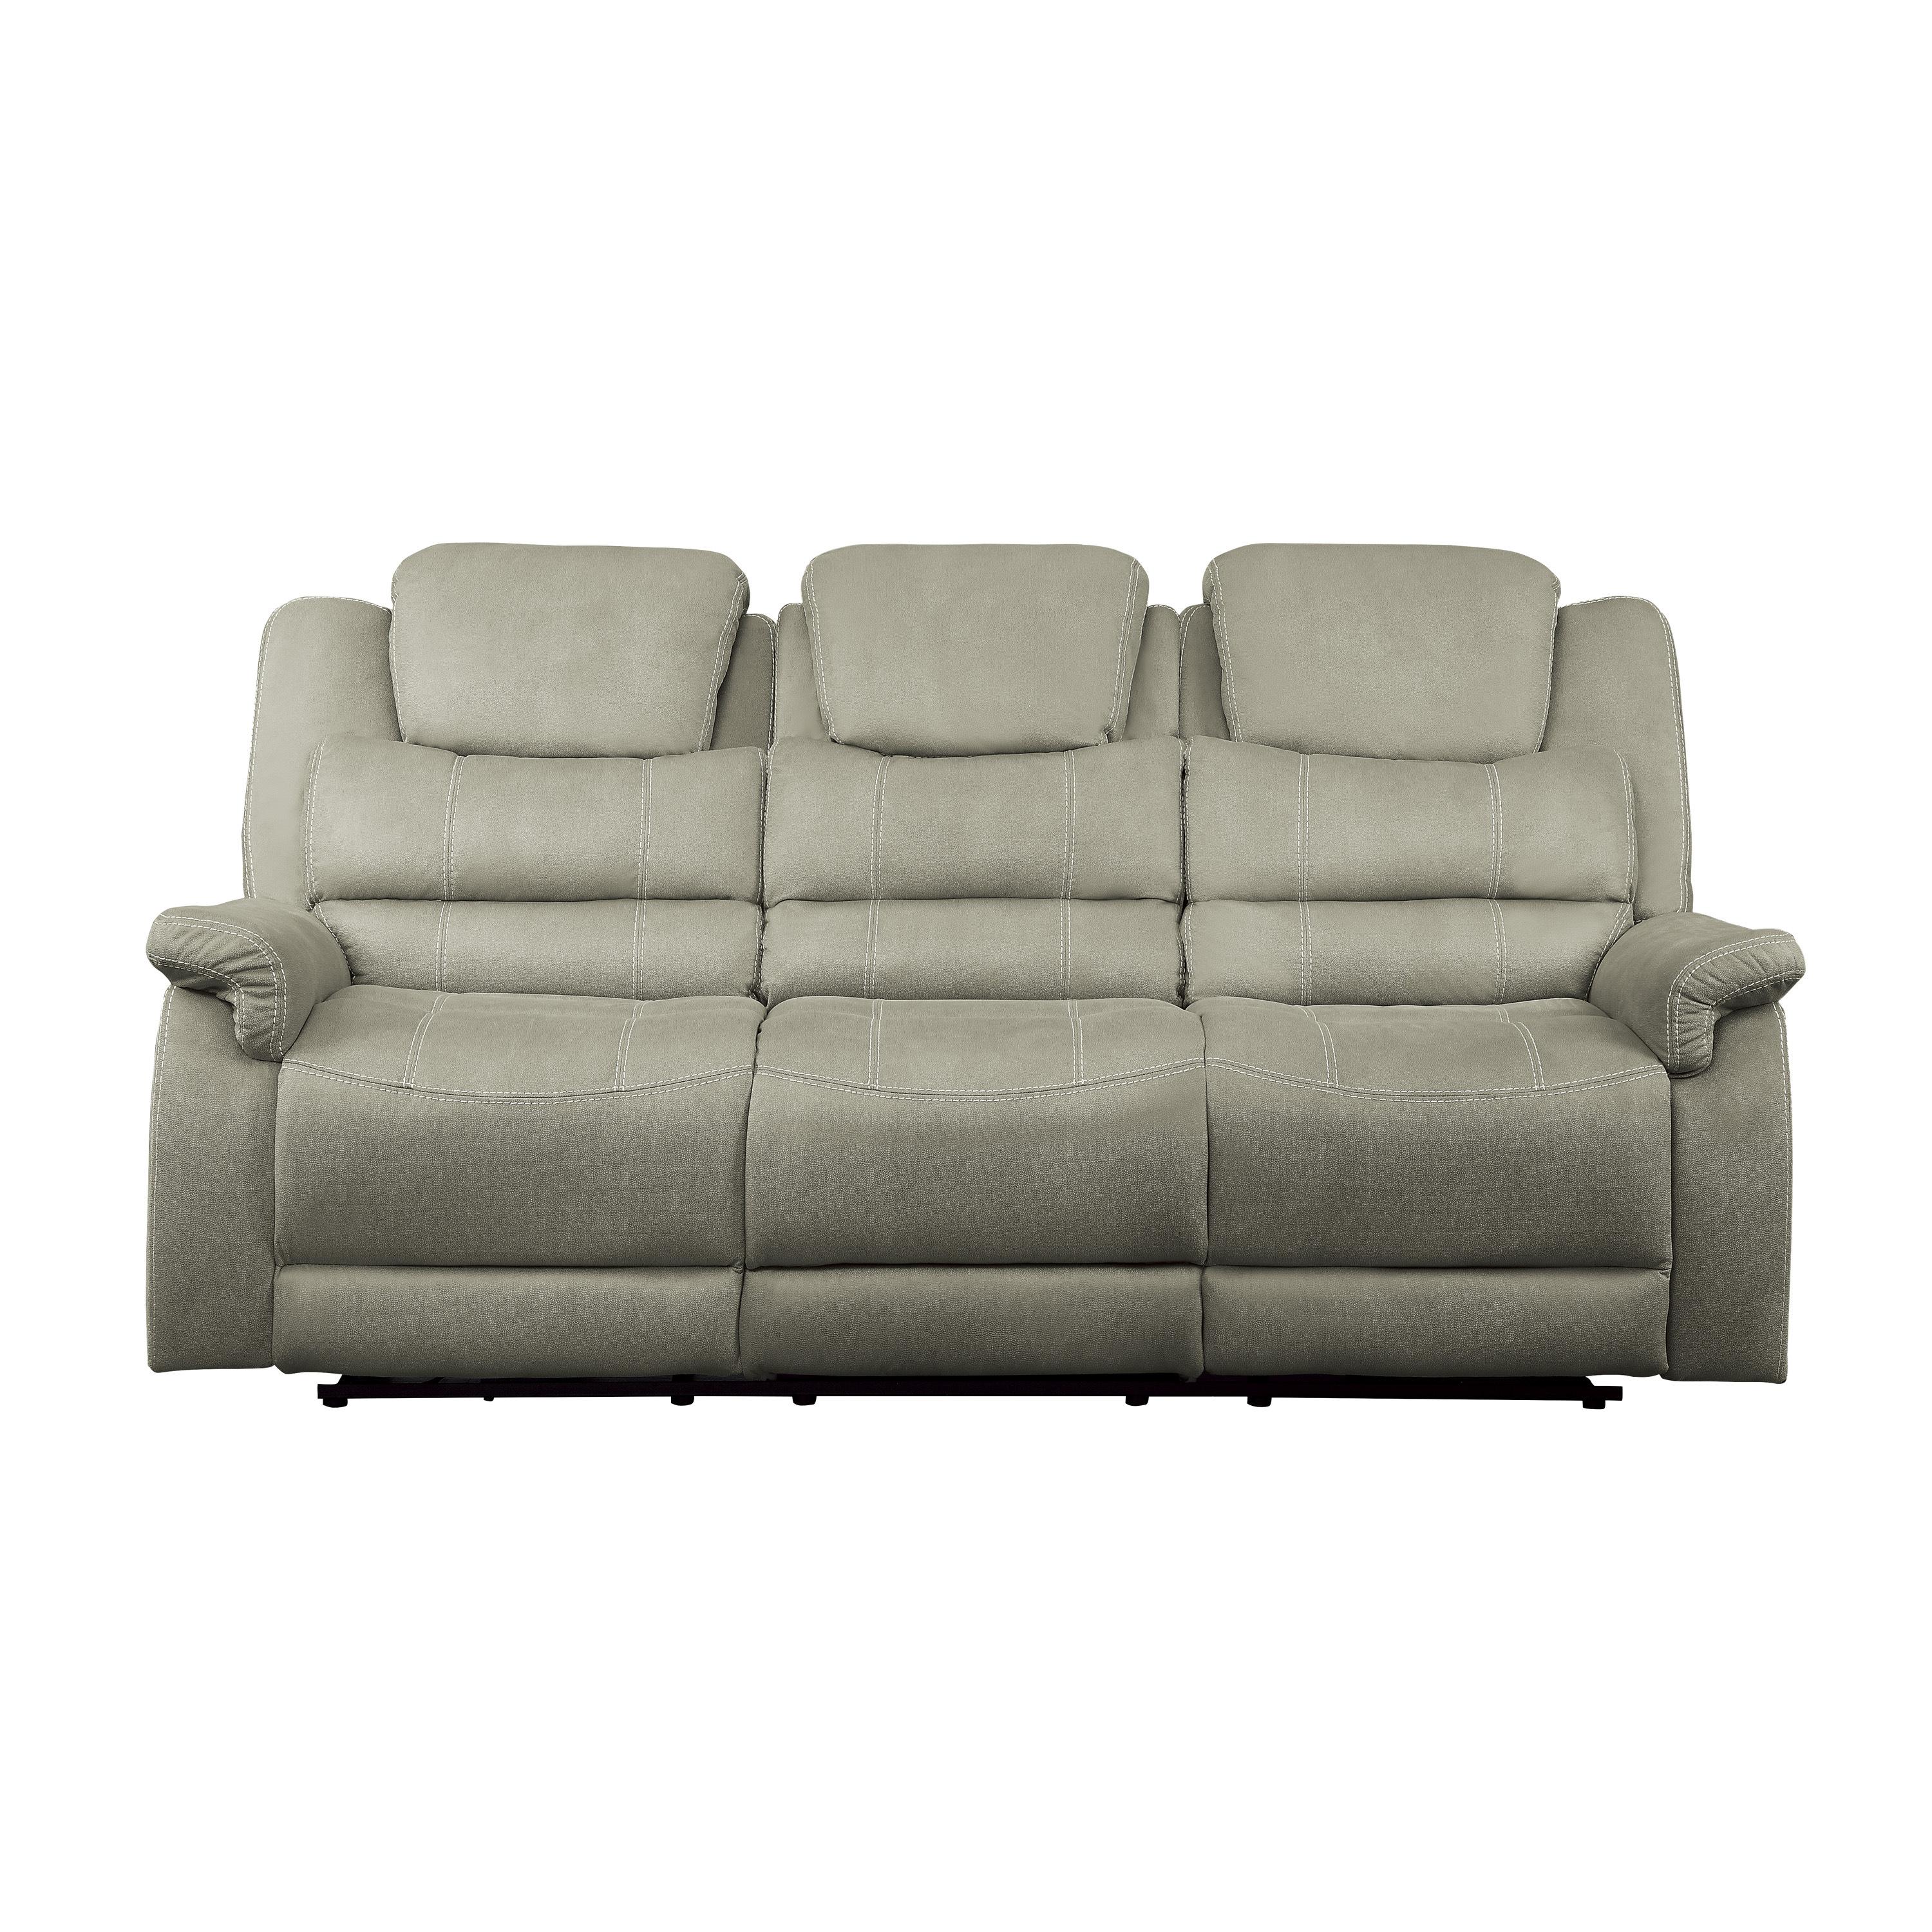 Transitional Power Reclining Sofa 9848GY-3PWH Shola 9848GY-3PWH in Gray Microfiber